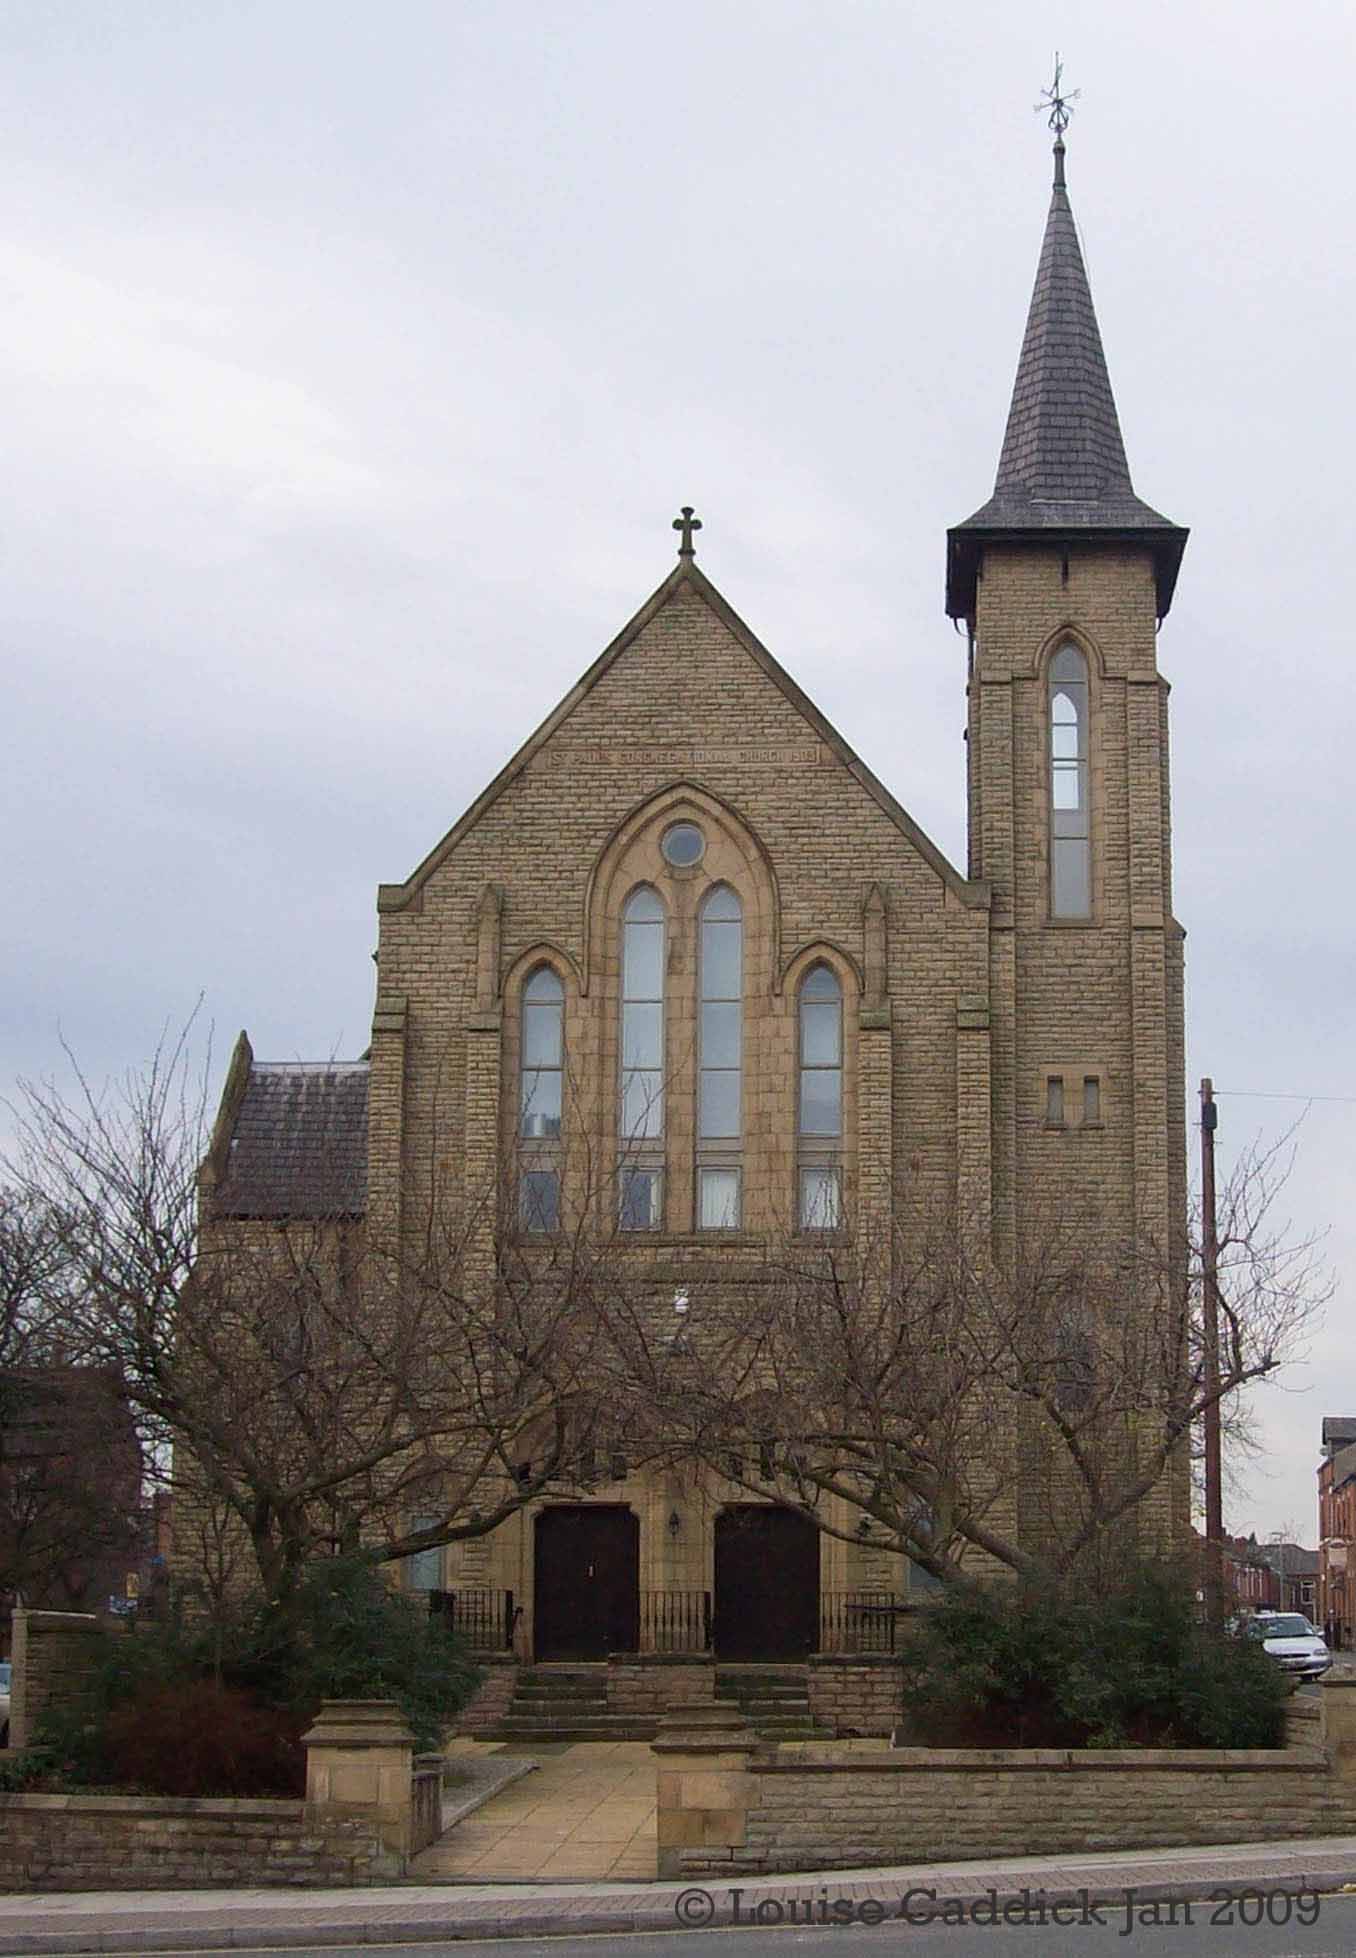 The Congregational church on Standishgate opened in 1903 to replace the original St Pauls Chapel. Now converted to appartments